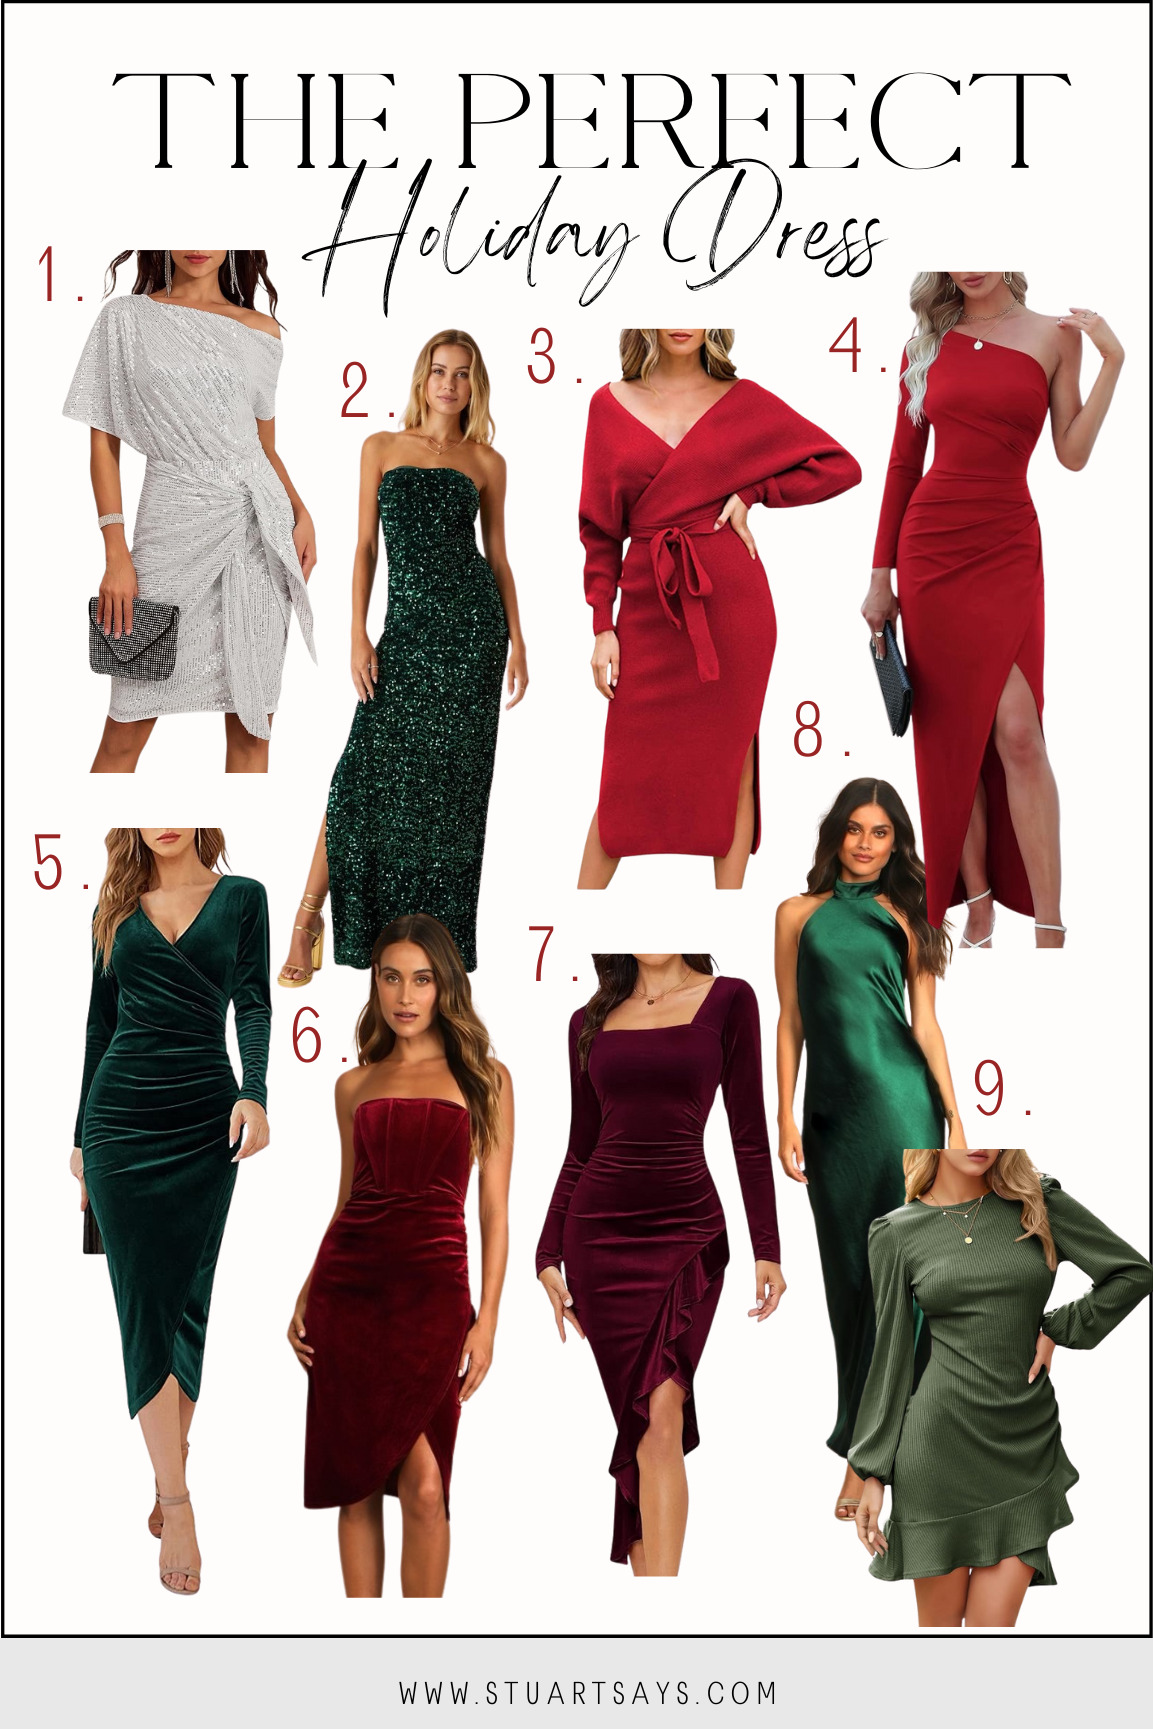 The PERFECT Holiday Event Dress